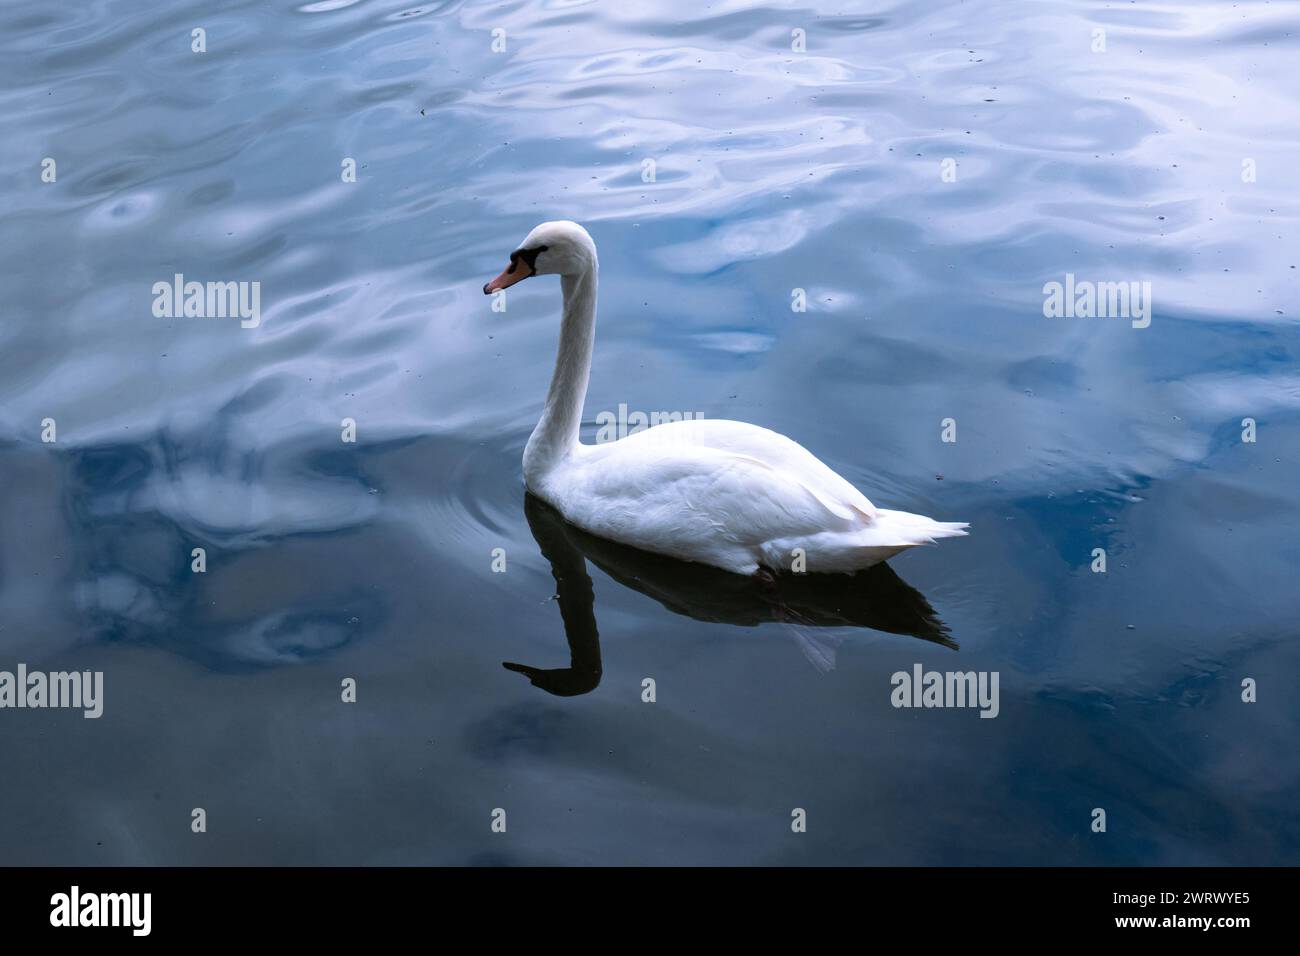 A white swan swimming in the lake. Silky water and white swan Stock Photo